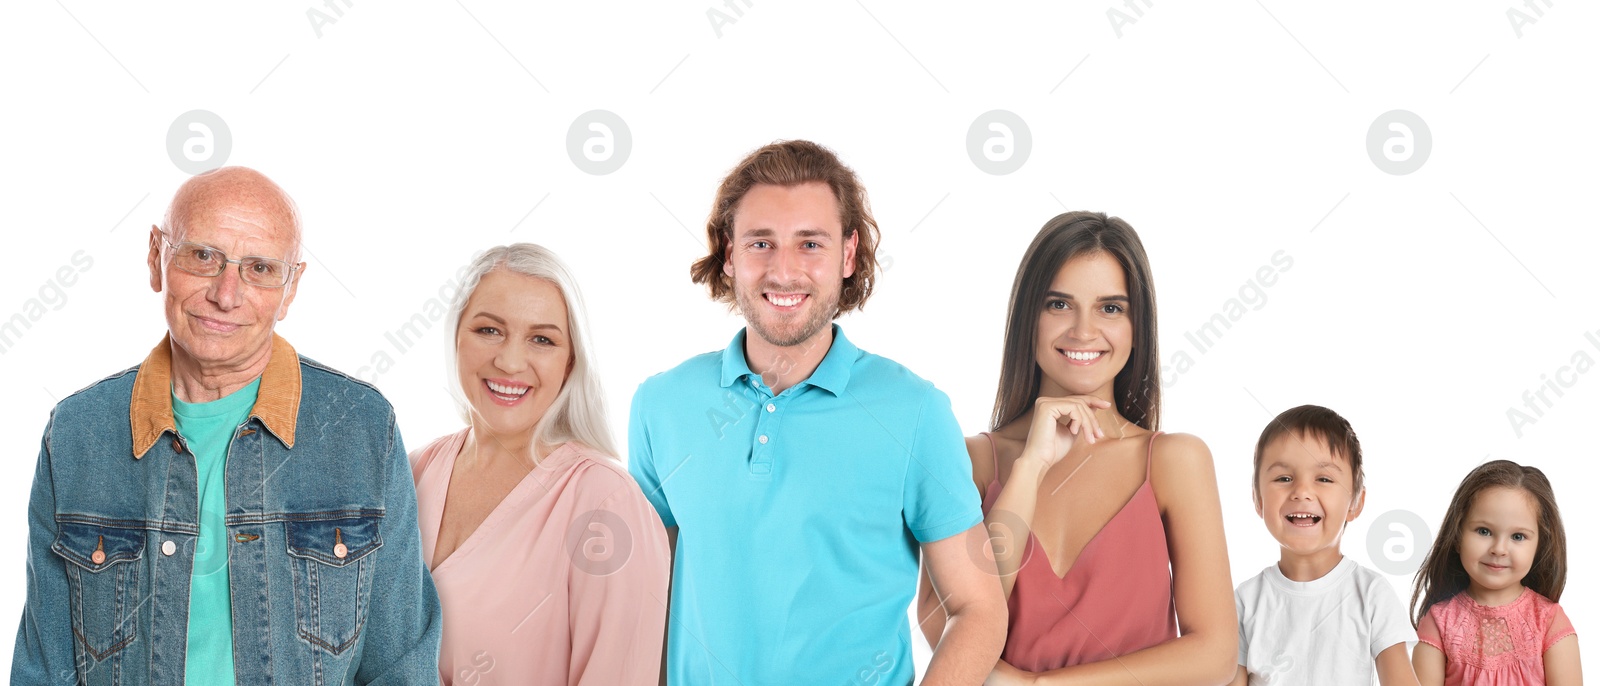 Image of People of different ages on white background. Three generations of family